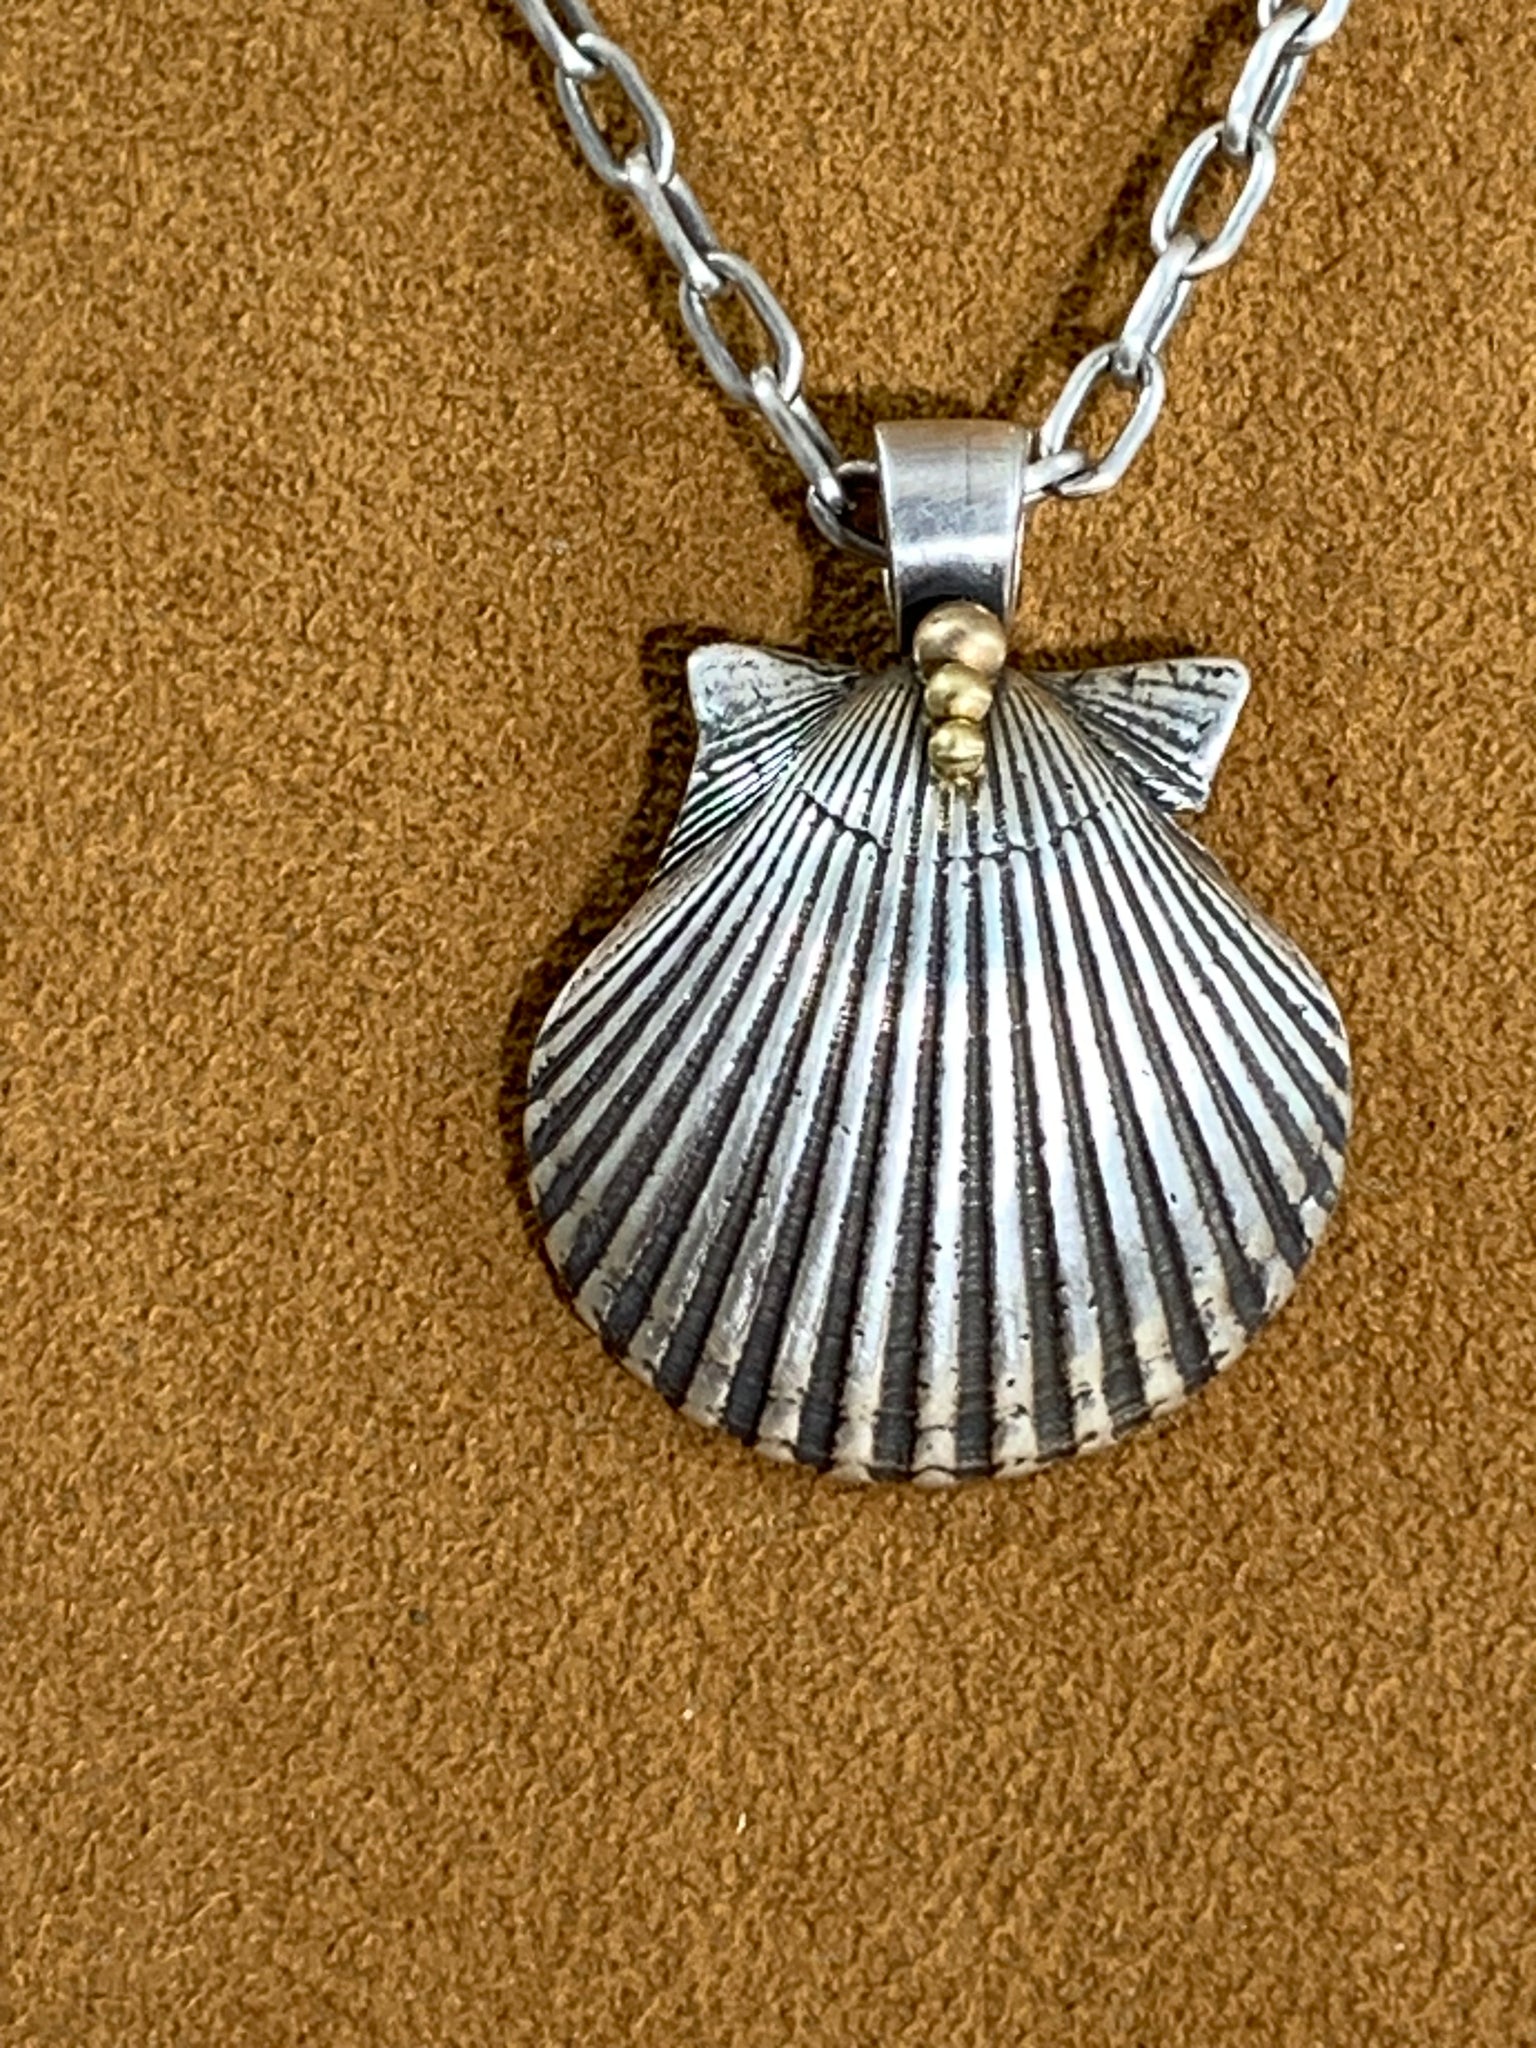 Shell Necklace by Dennis Hogan